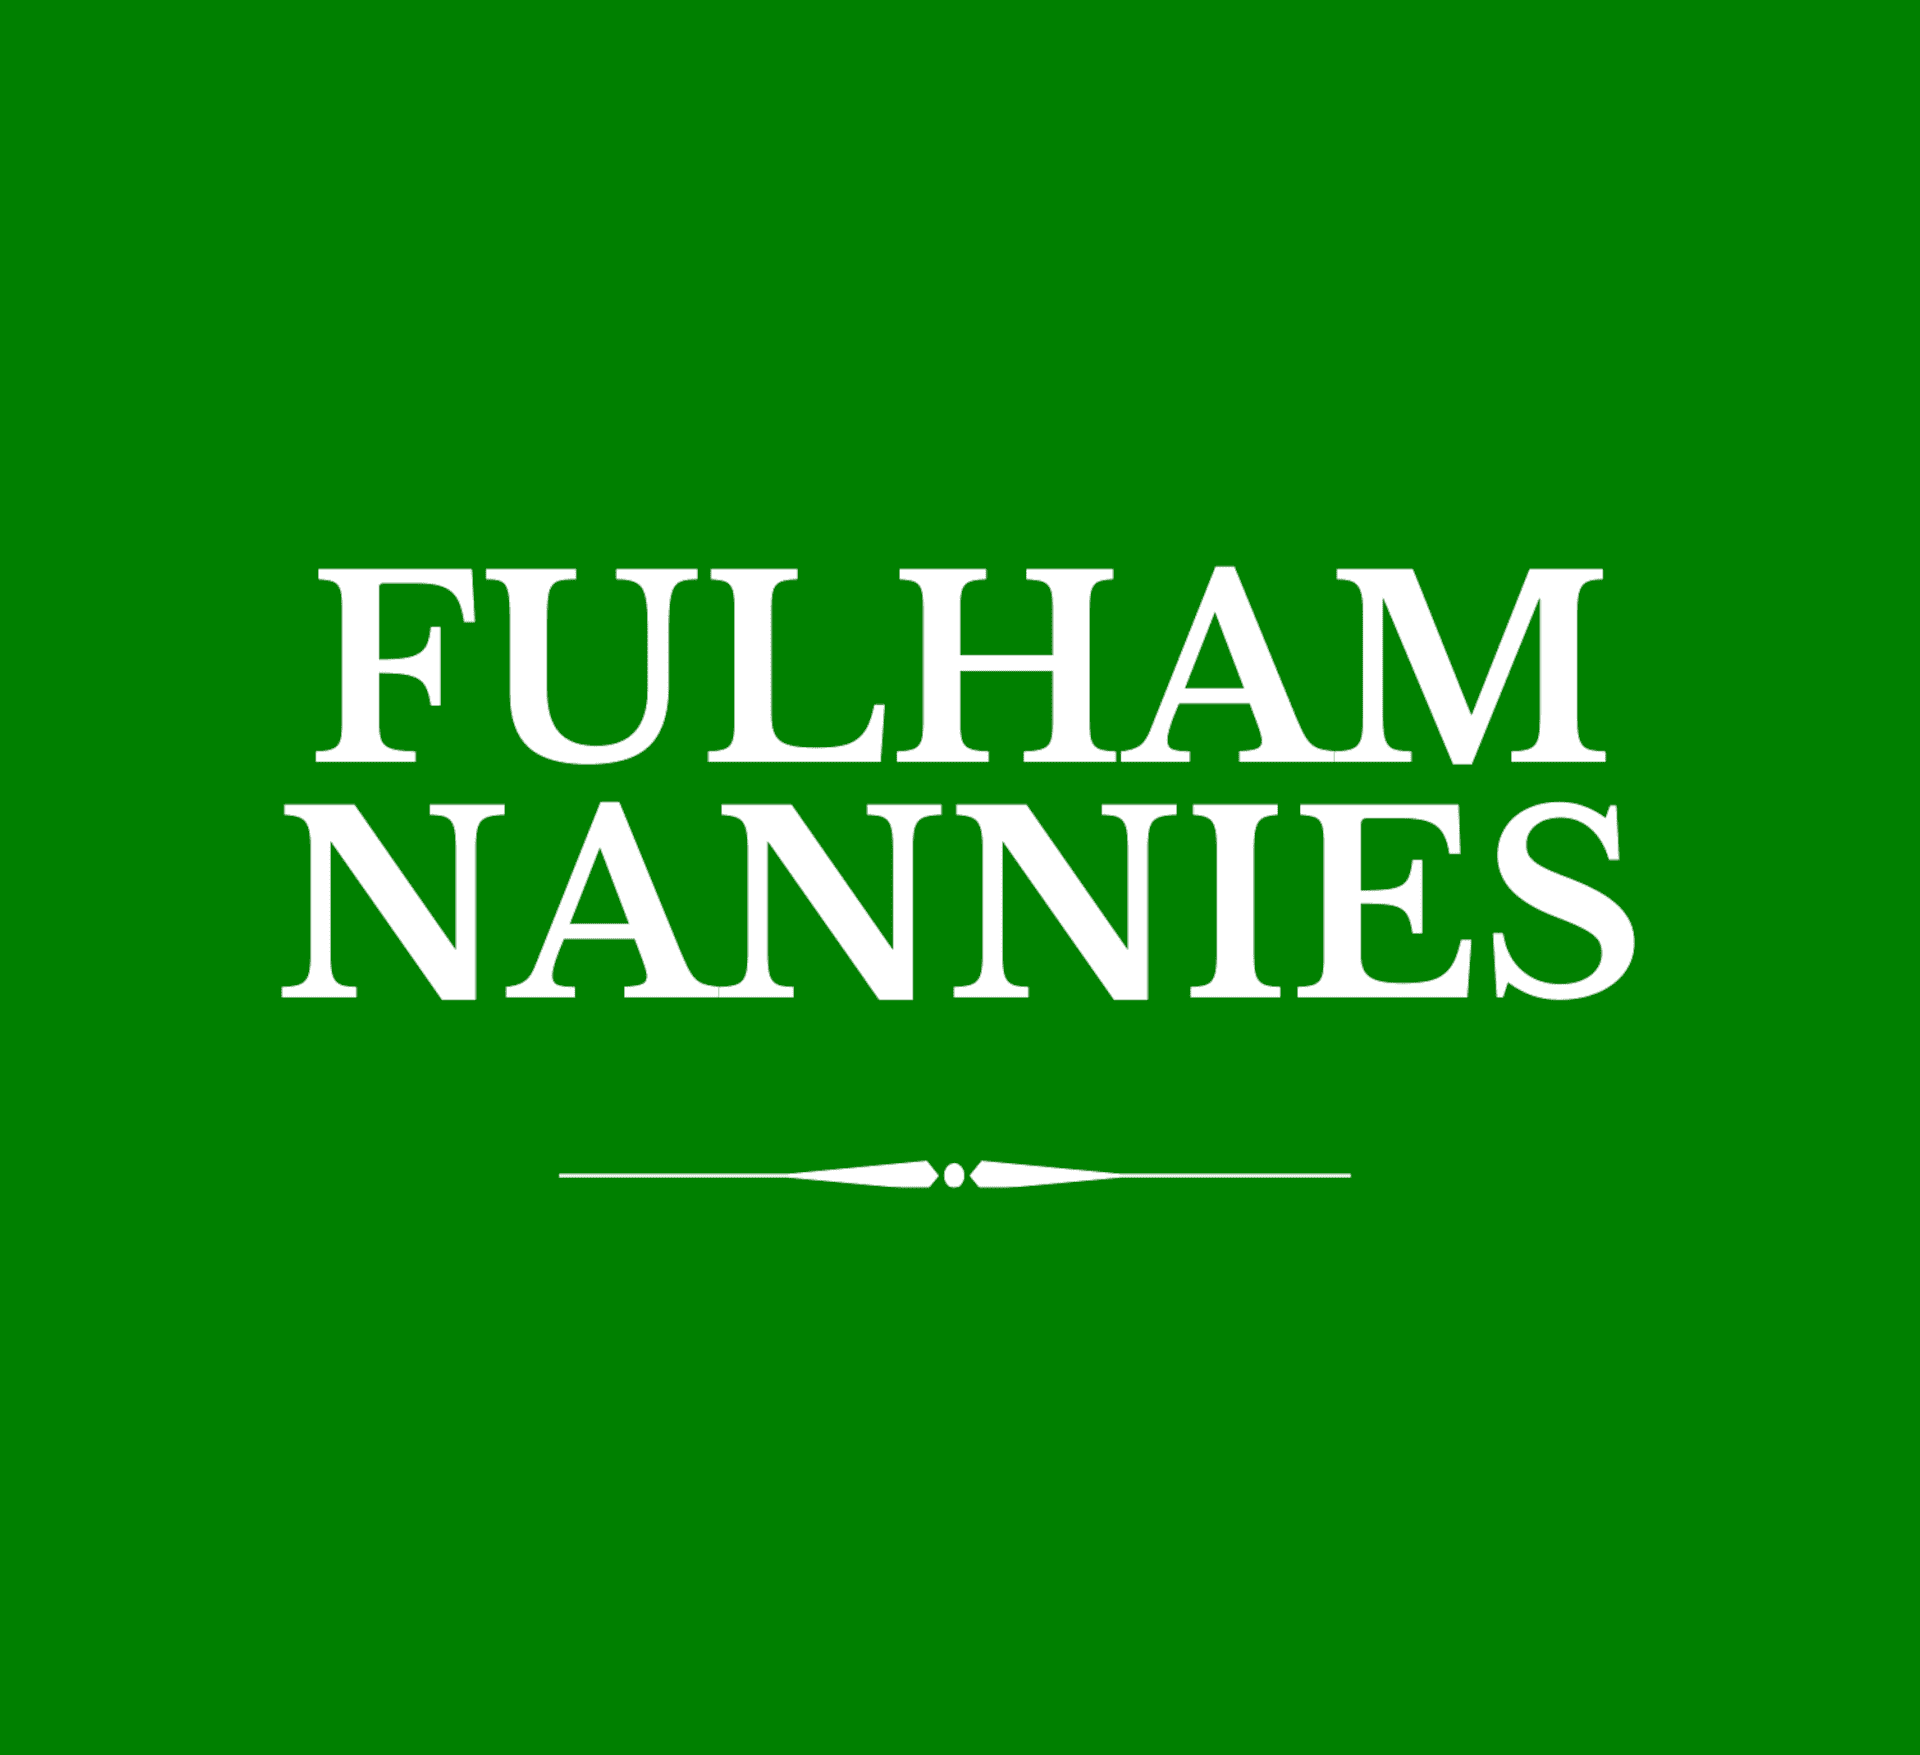 Working As A Nanny In London Fulham Nannies